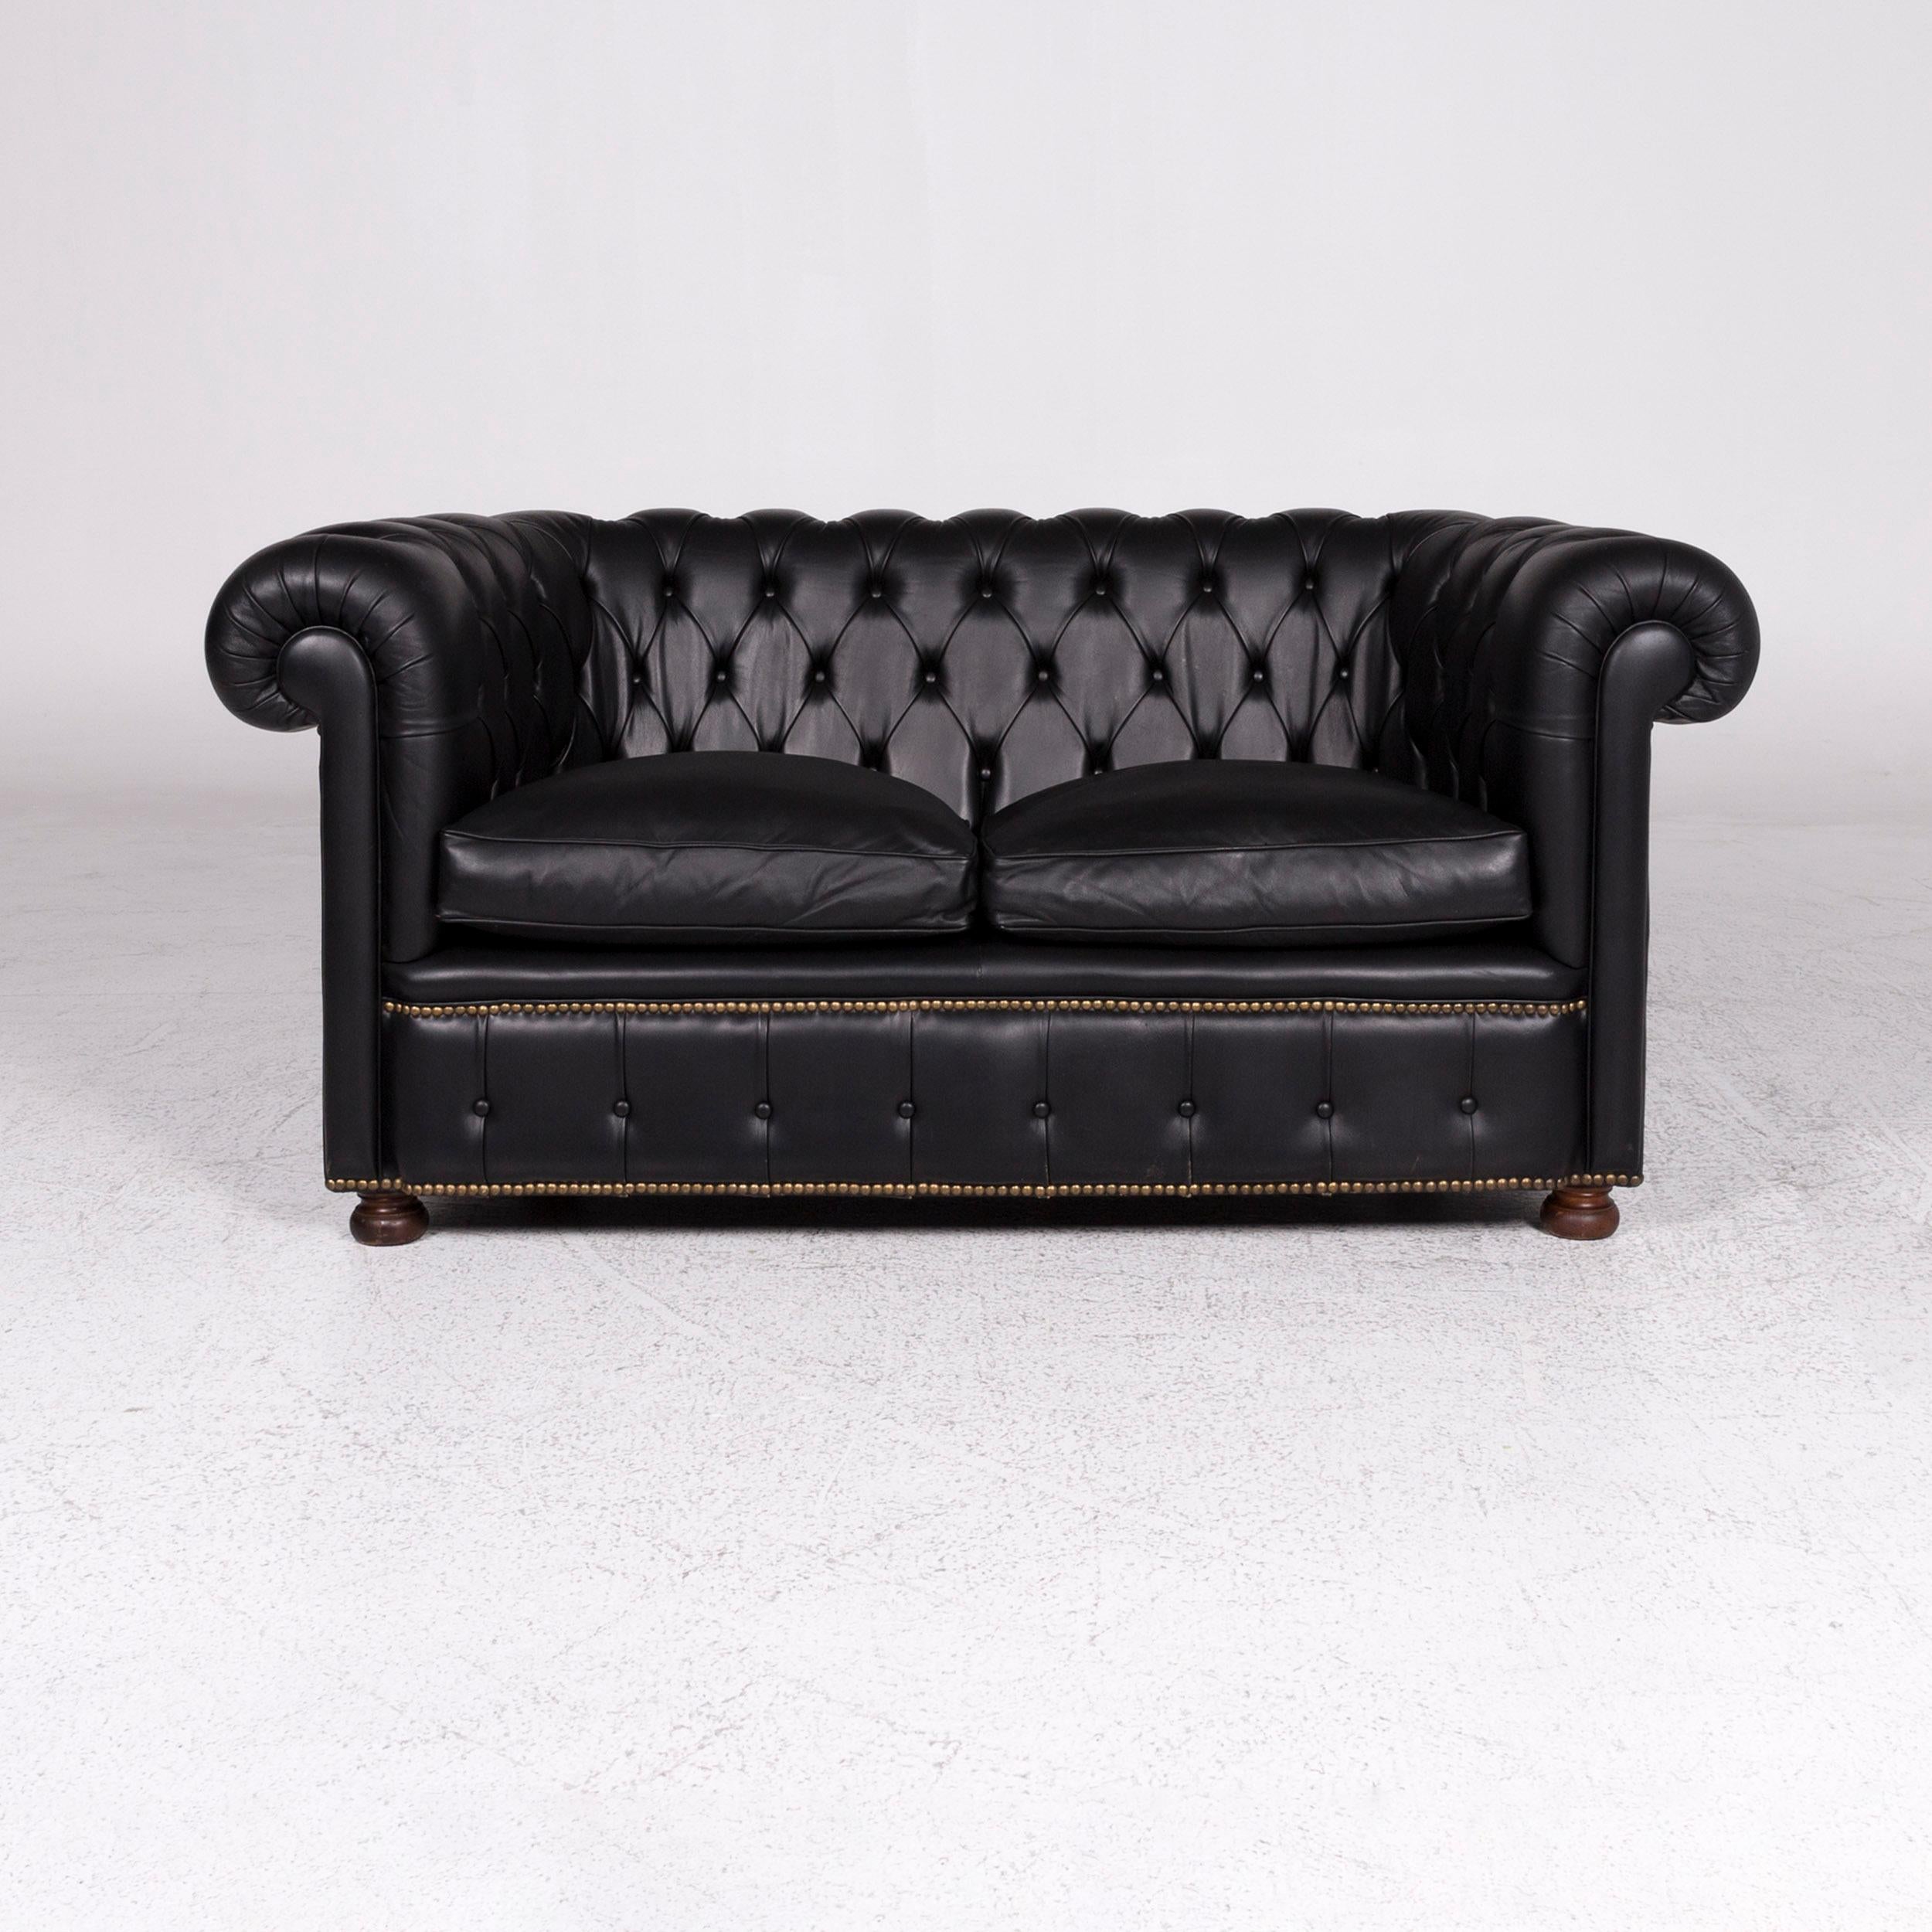 We bring to you a Chesterfield leather sofa gray two-seat retro couch.
 
 Product measurements in centimeters:
 
 Depth 91
Width 165
Height 75
Seat-height 51
Rest-height 76
Seat-depth 58
Seat-width 108
Back-height 29.
 
    